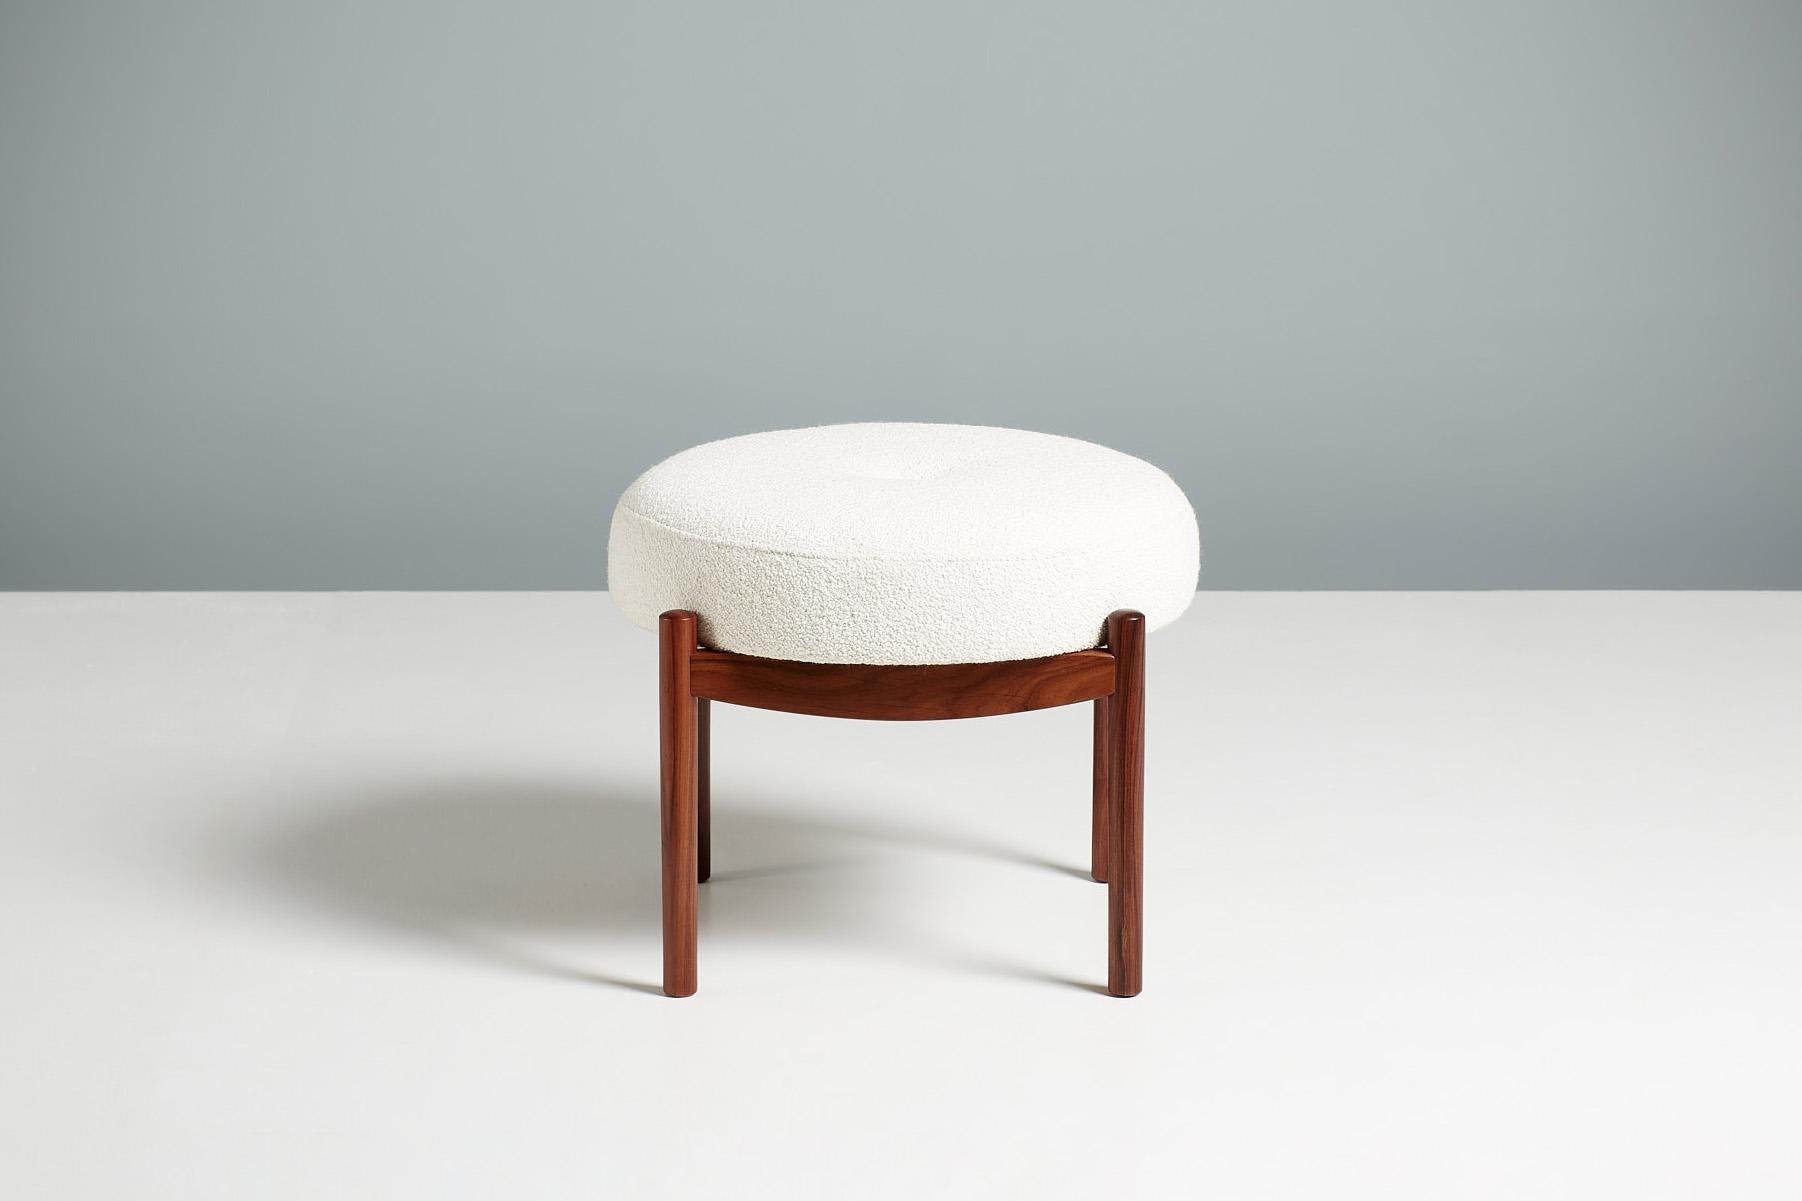 Custom Made Esko Ottoman from Dagmar Design

A custom-made round ottoman with luxurious Santos rosewood frames developed & produced at Dagmar's workshops in London. This example has a seat upholstered in off-white boucle fabric from Chase Erwin.